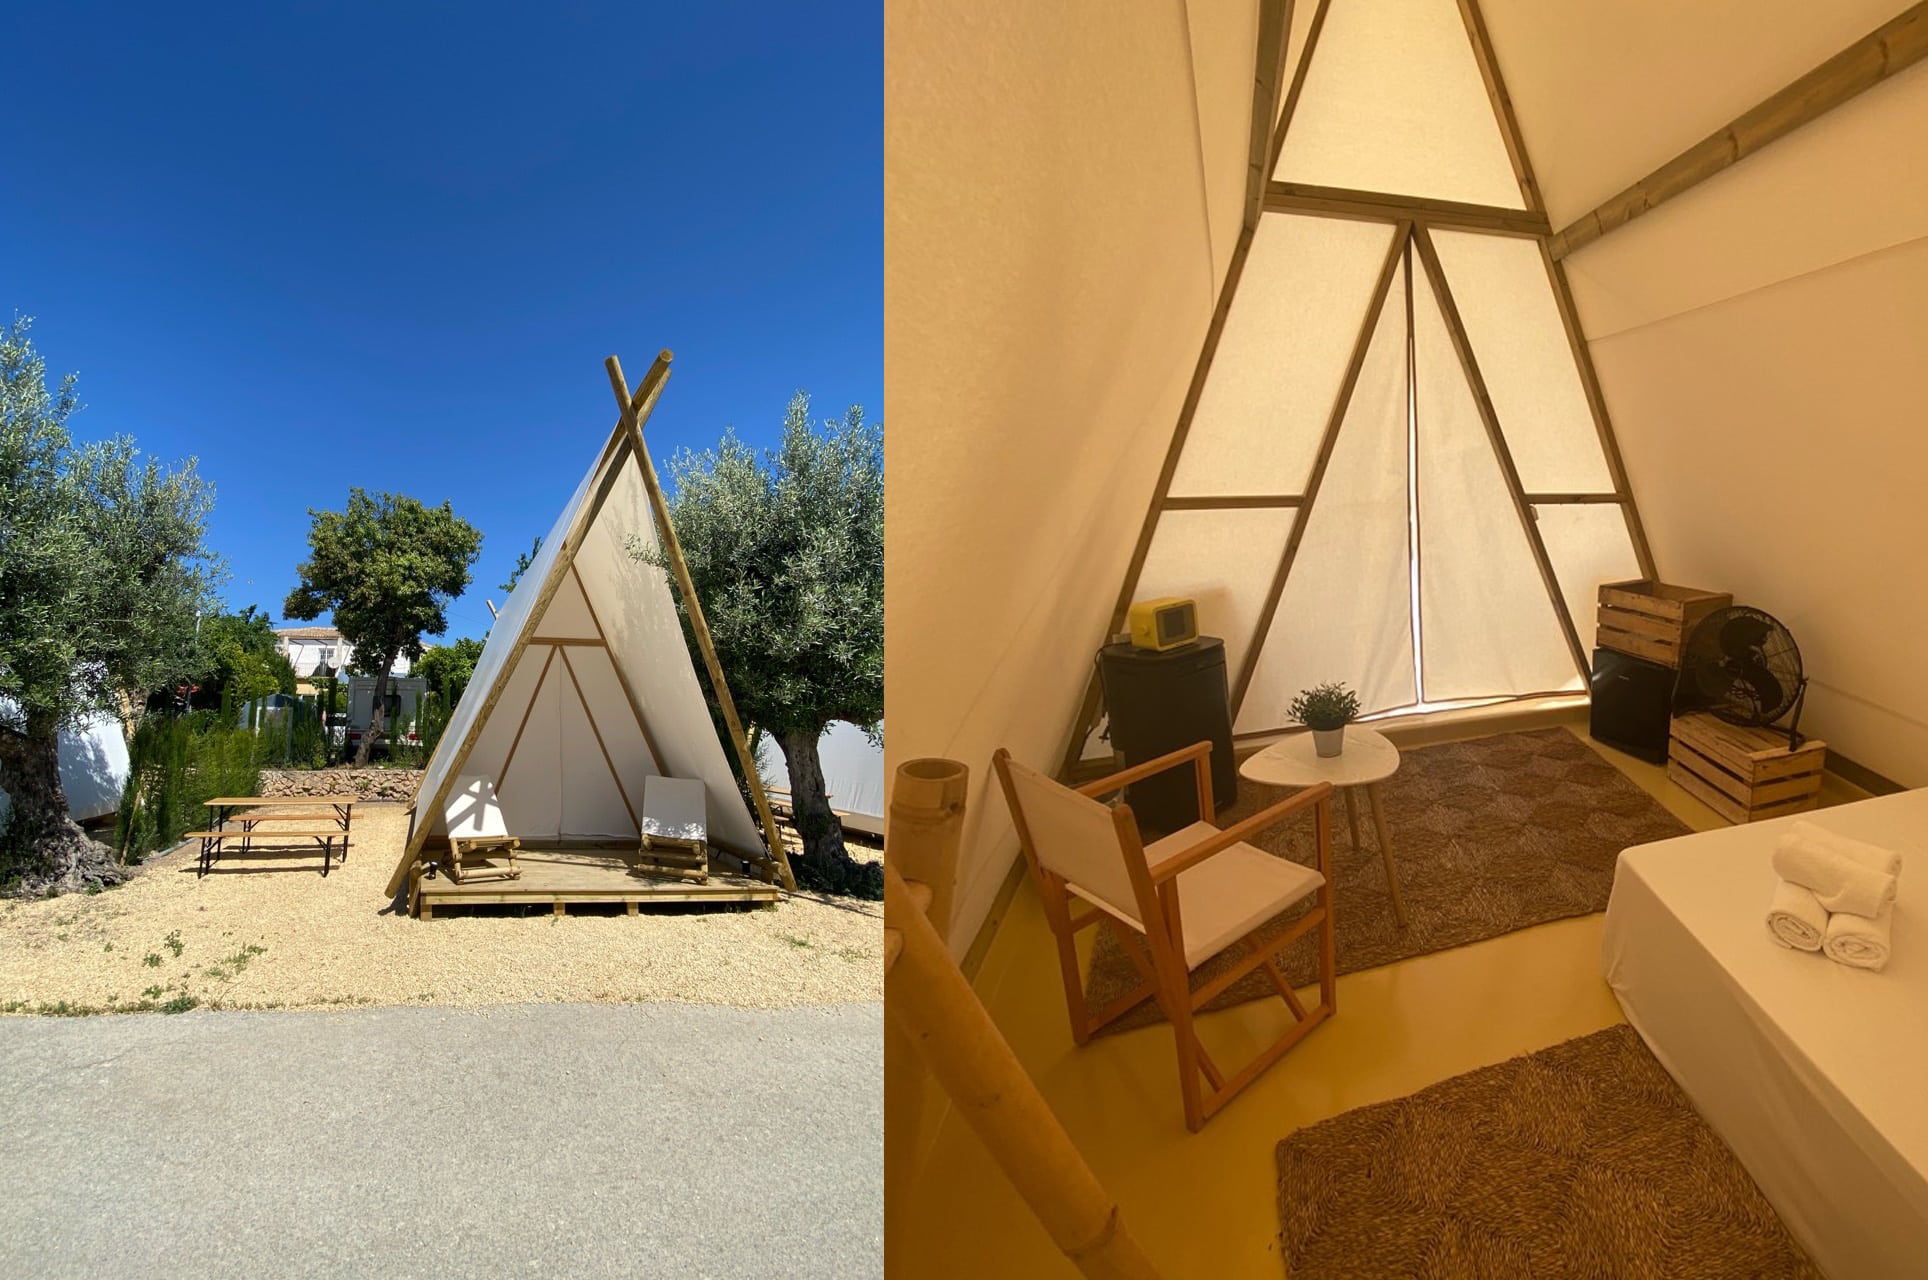 Interior and exterior of kampaoh's nusa tent